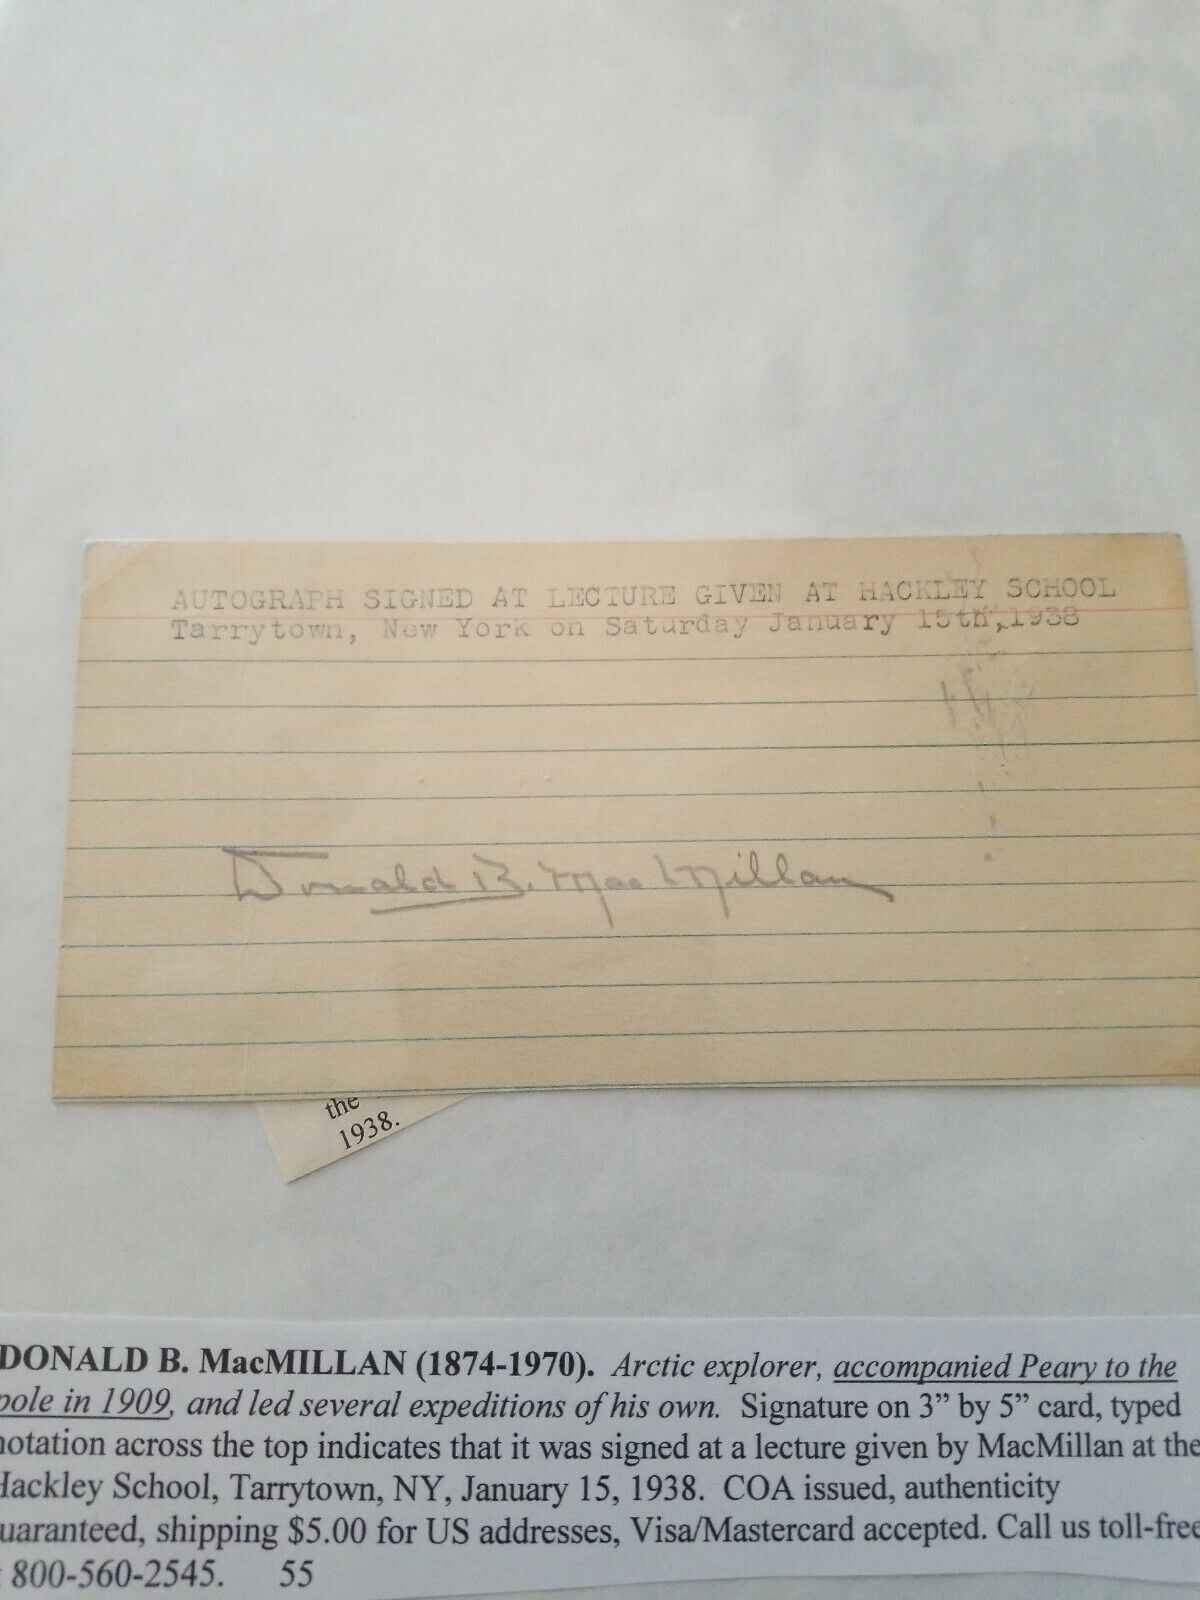 DONALD B. MacMILLAN SIGNATURE 3x5 card in pencil with notation on where obtained